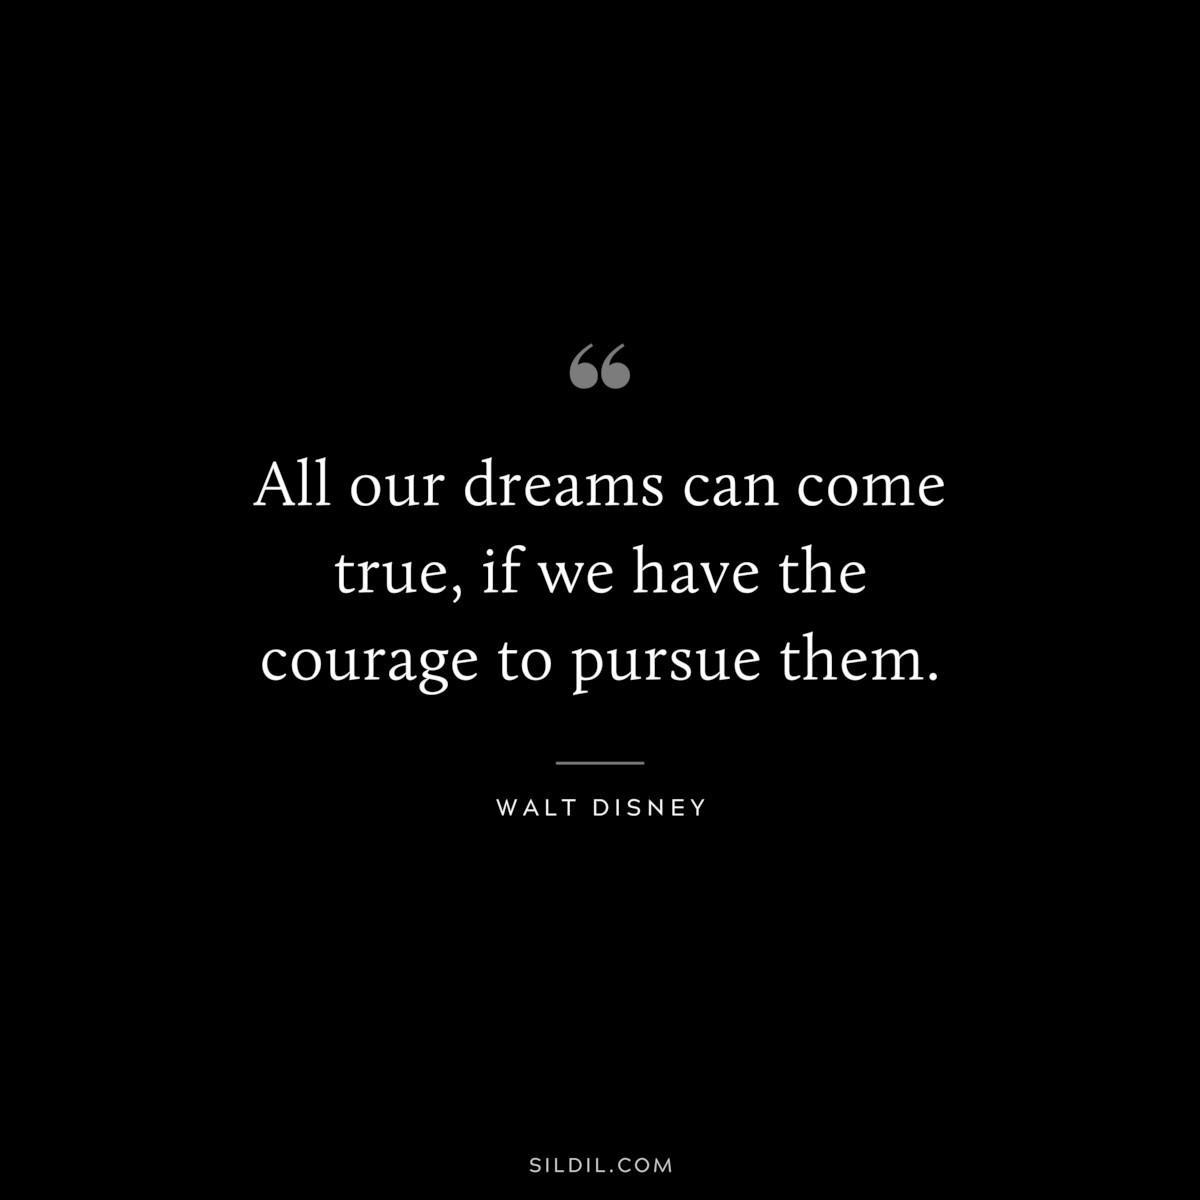 All our dreams can come true, if we have the courage to pursue them. ― Walt Disney